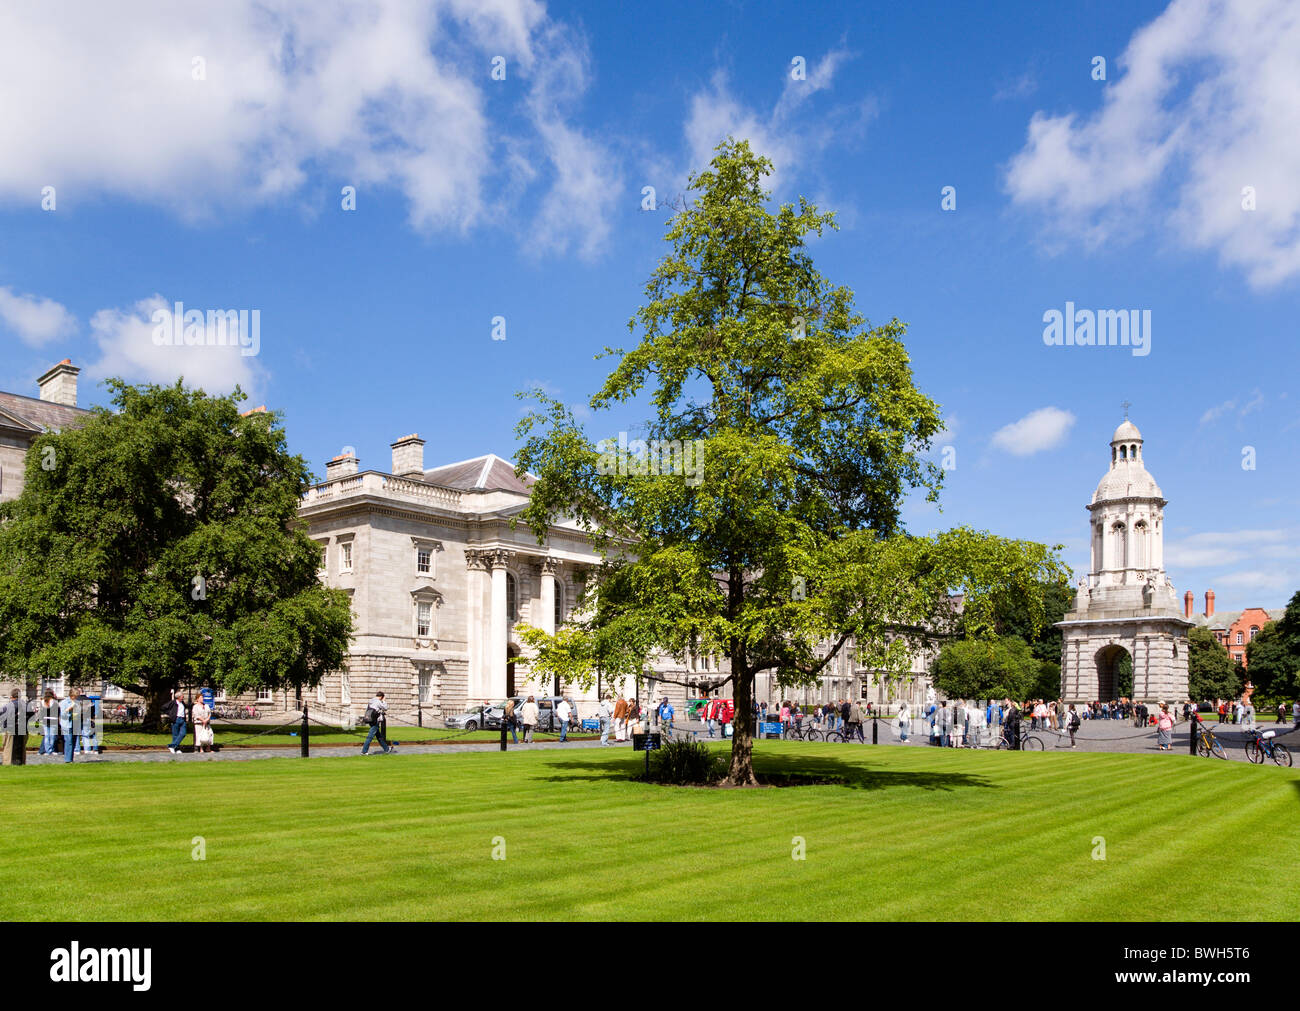 Ireland County Dublin City Trinity College university with people walking through Parliament Square towards Campanile Stock Photo